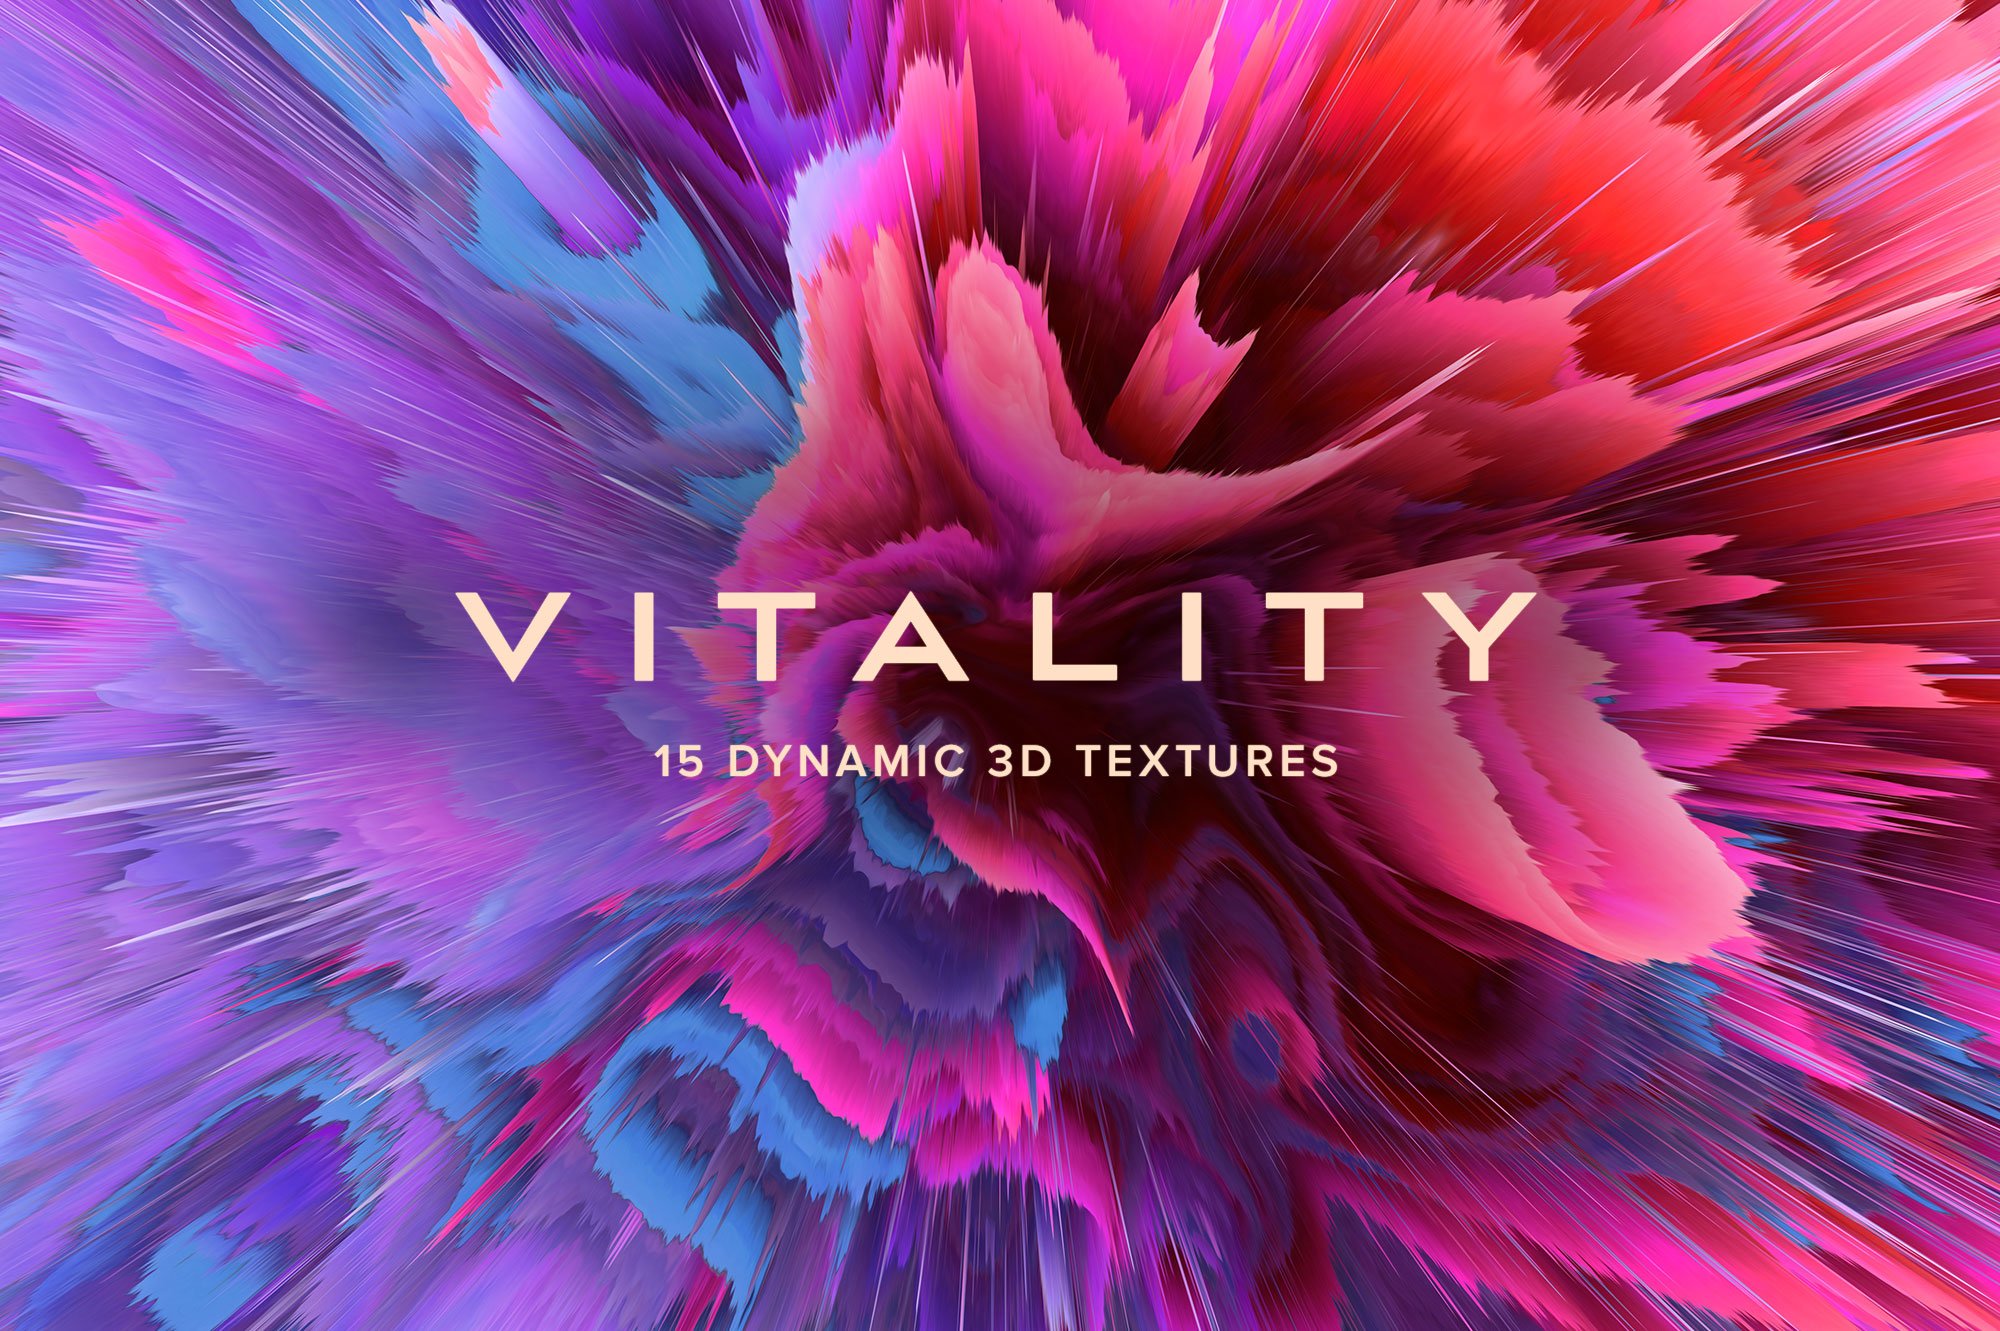 Vitality: 15 Dynamic 3D Textures cover image.